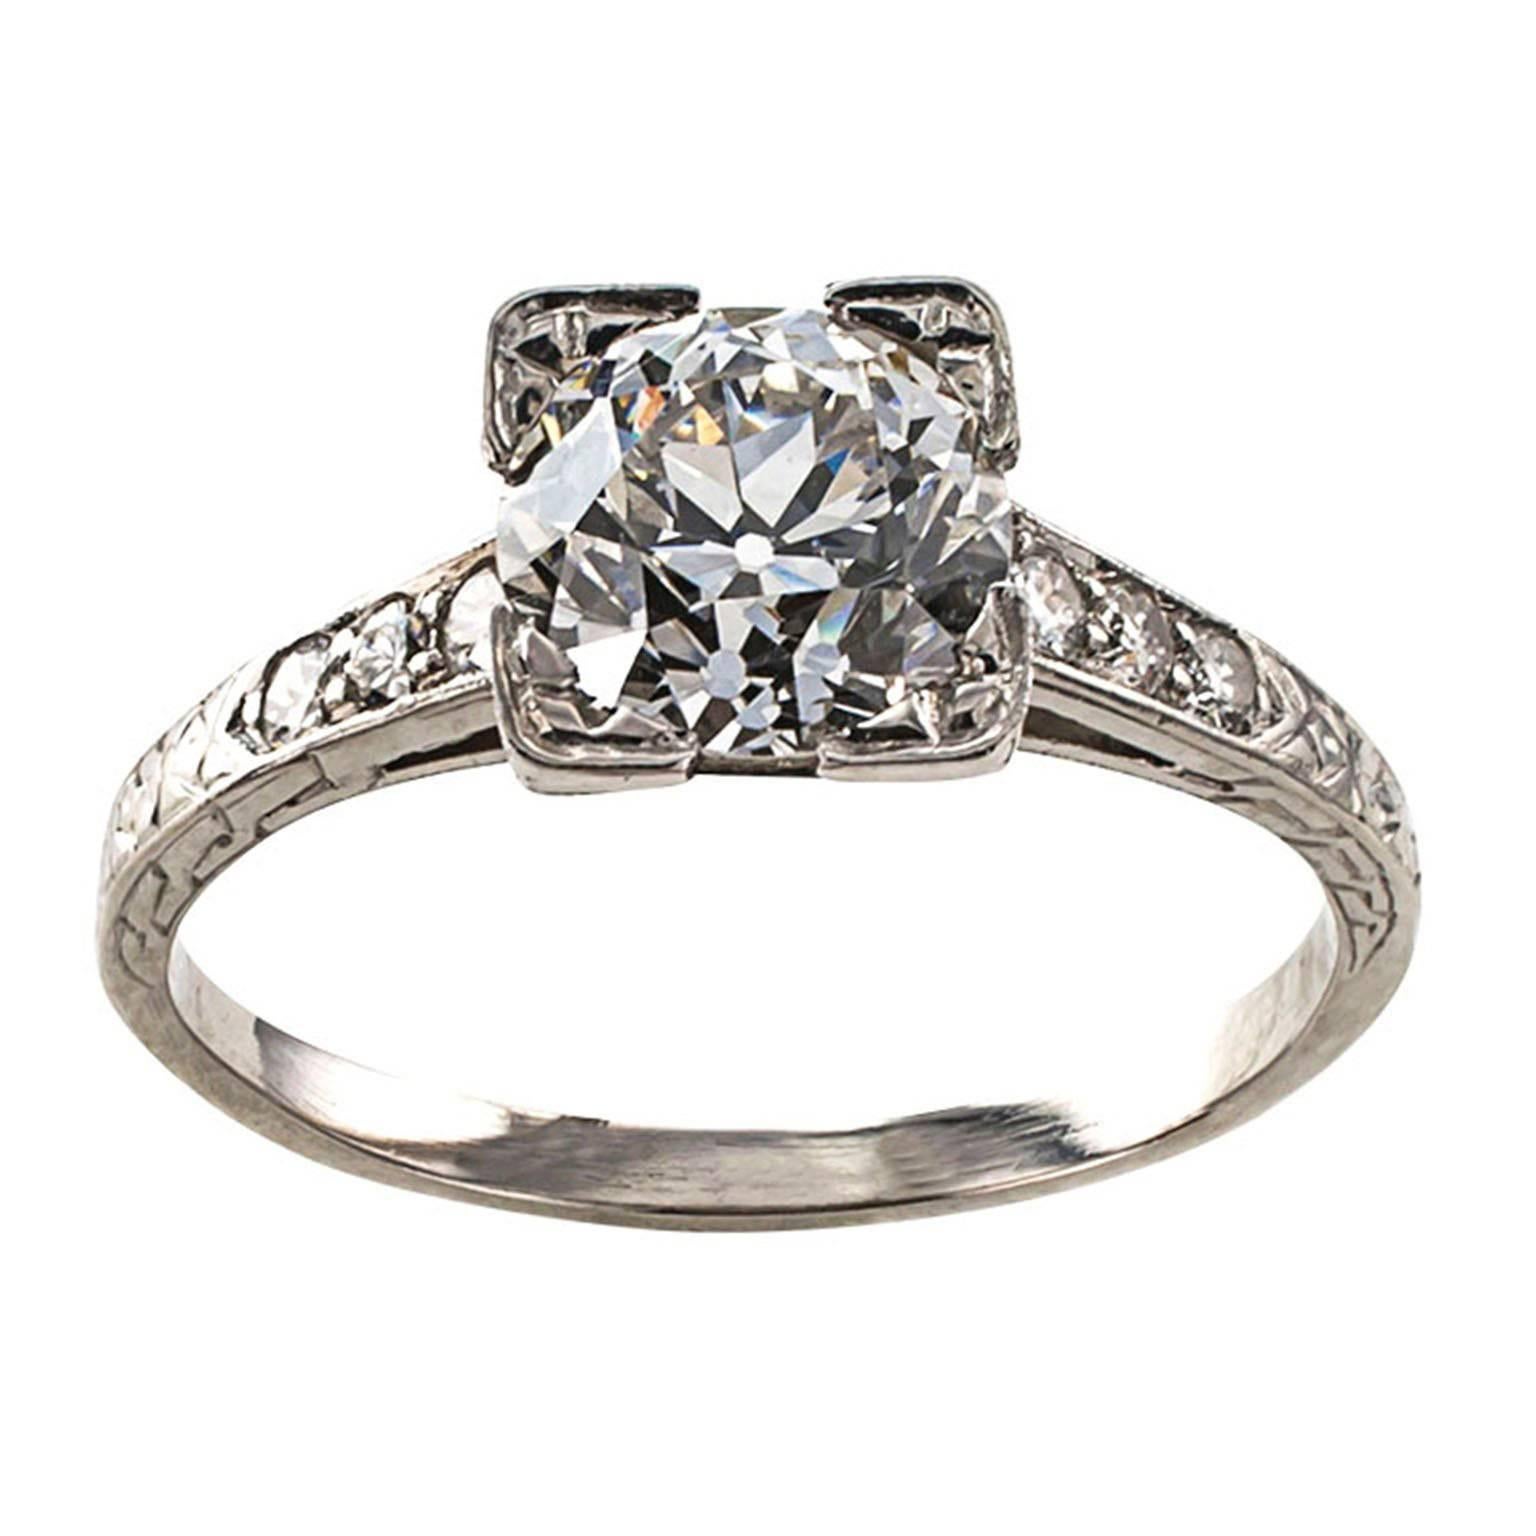 1.39 Carats Diamond Art Deco Engagement Ring Circa 1925

Authentic platinum Art Deco engagement ring centering upon an old European-cut diamond of exceptional color and clarity for the period.  And if you must have a diamond bigger than a carat,